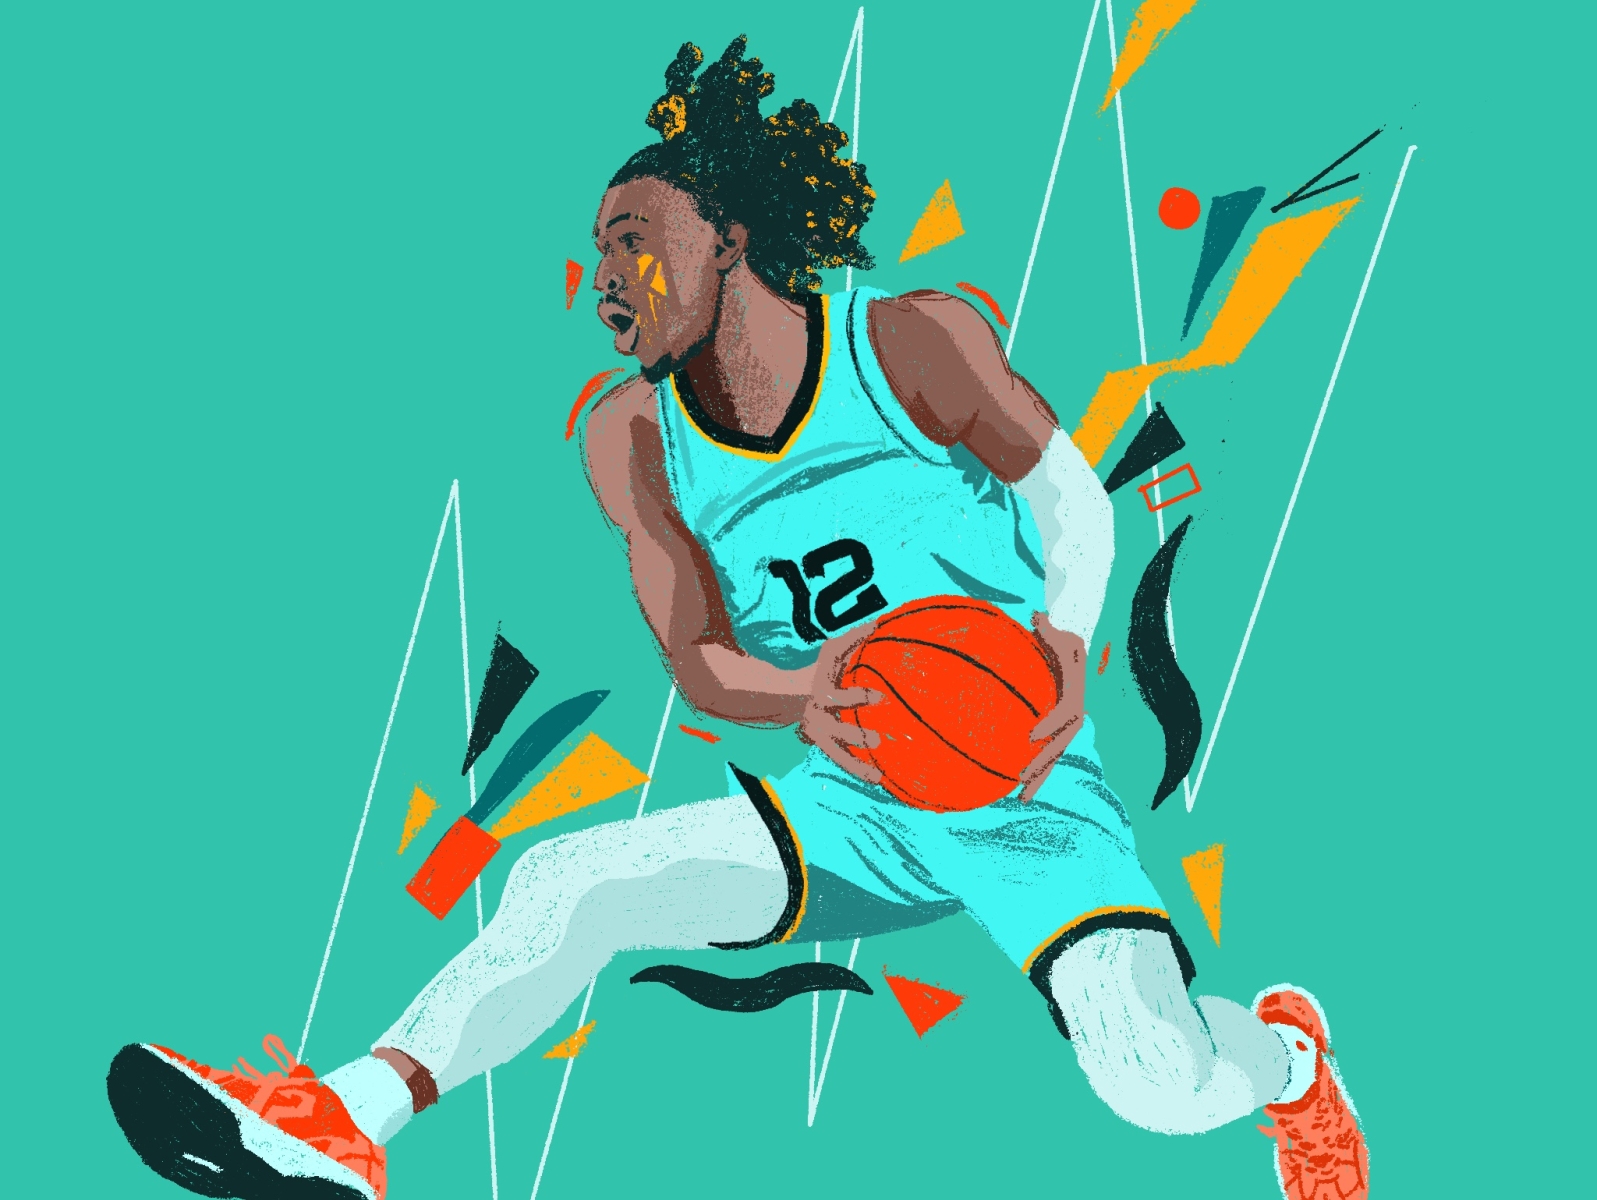 UniQue Gipson on Instagram ROTY  Tag jamorant Check Out My  Story For Wallpaper Swipe For Different   Nba pictures Nba artwork  Nba basketball art